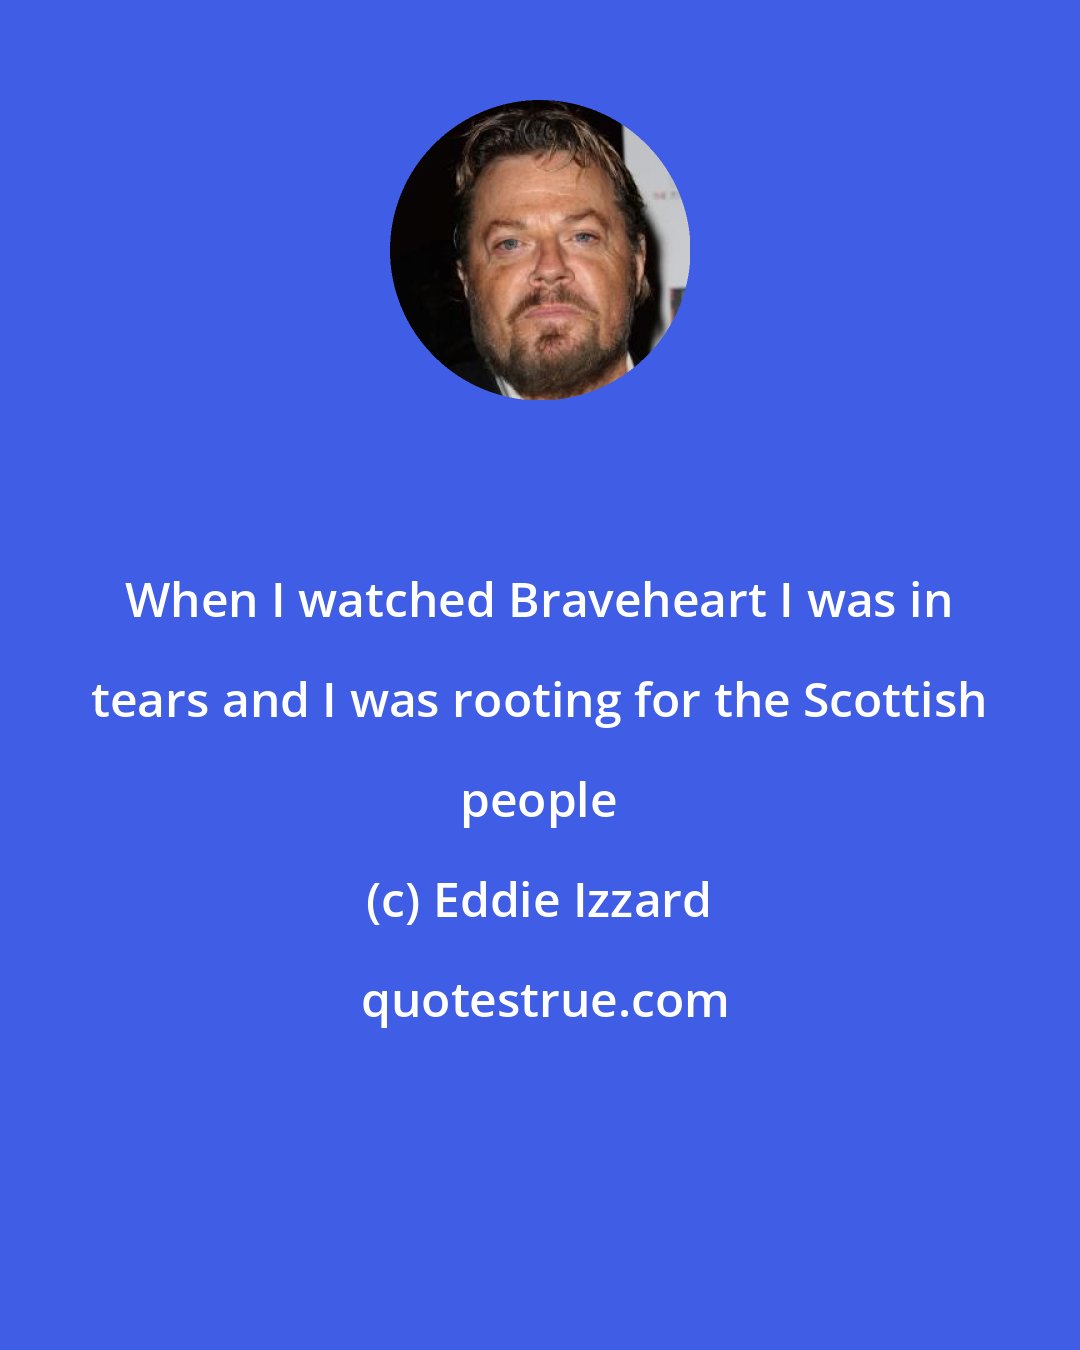 Eddie Izzard: When I watched Braveheart I was in tears and I was rooting for the Scottish people